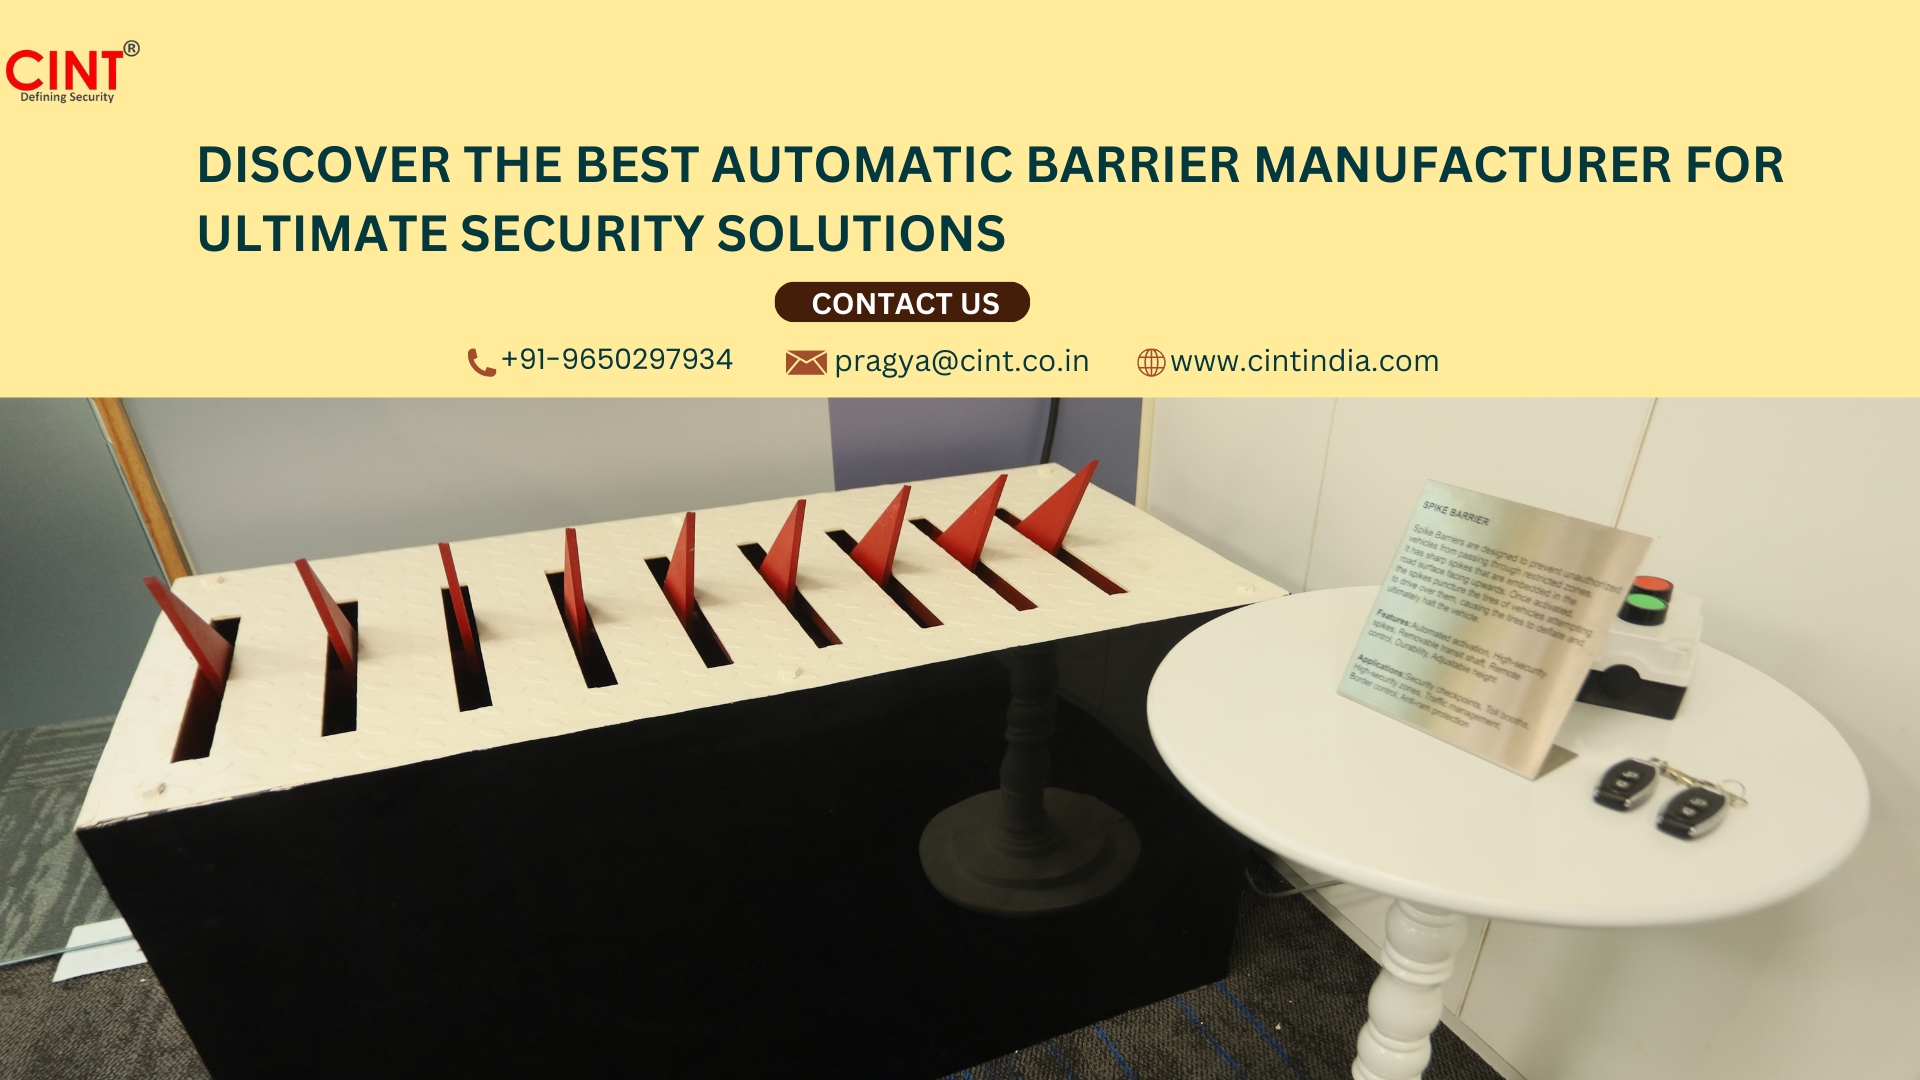 Discover the best automatic barrier manufacturer for ultimate security solutions.